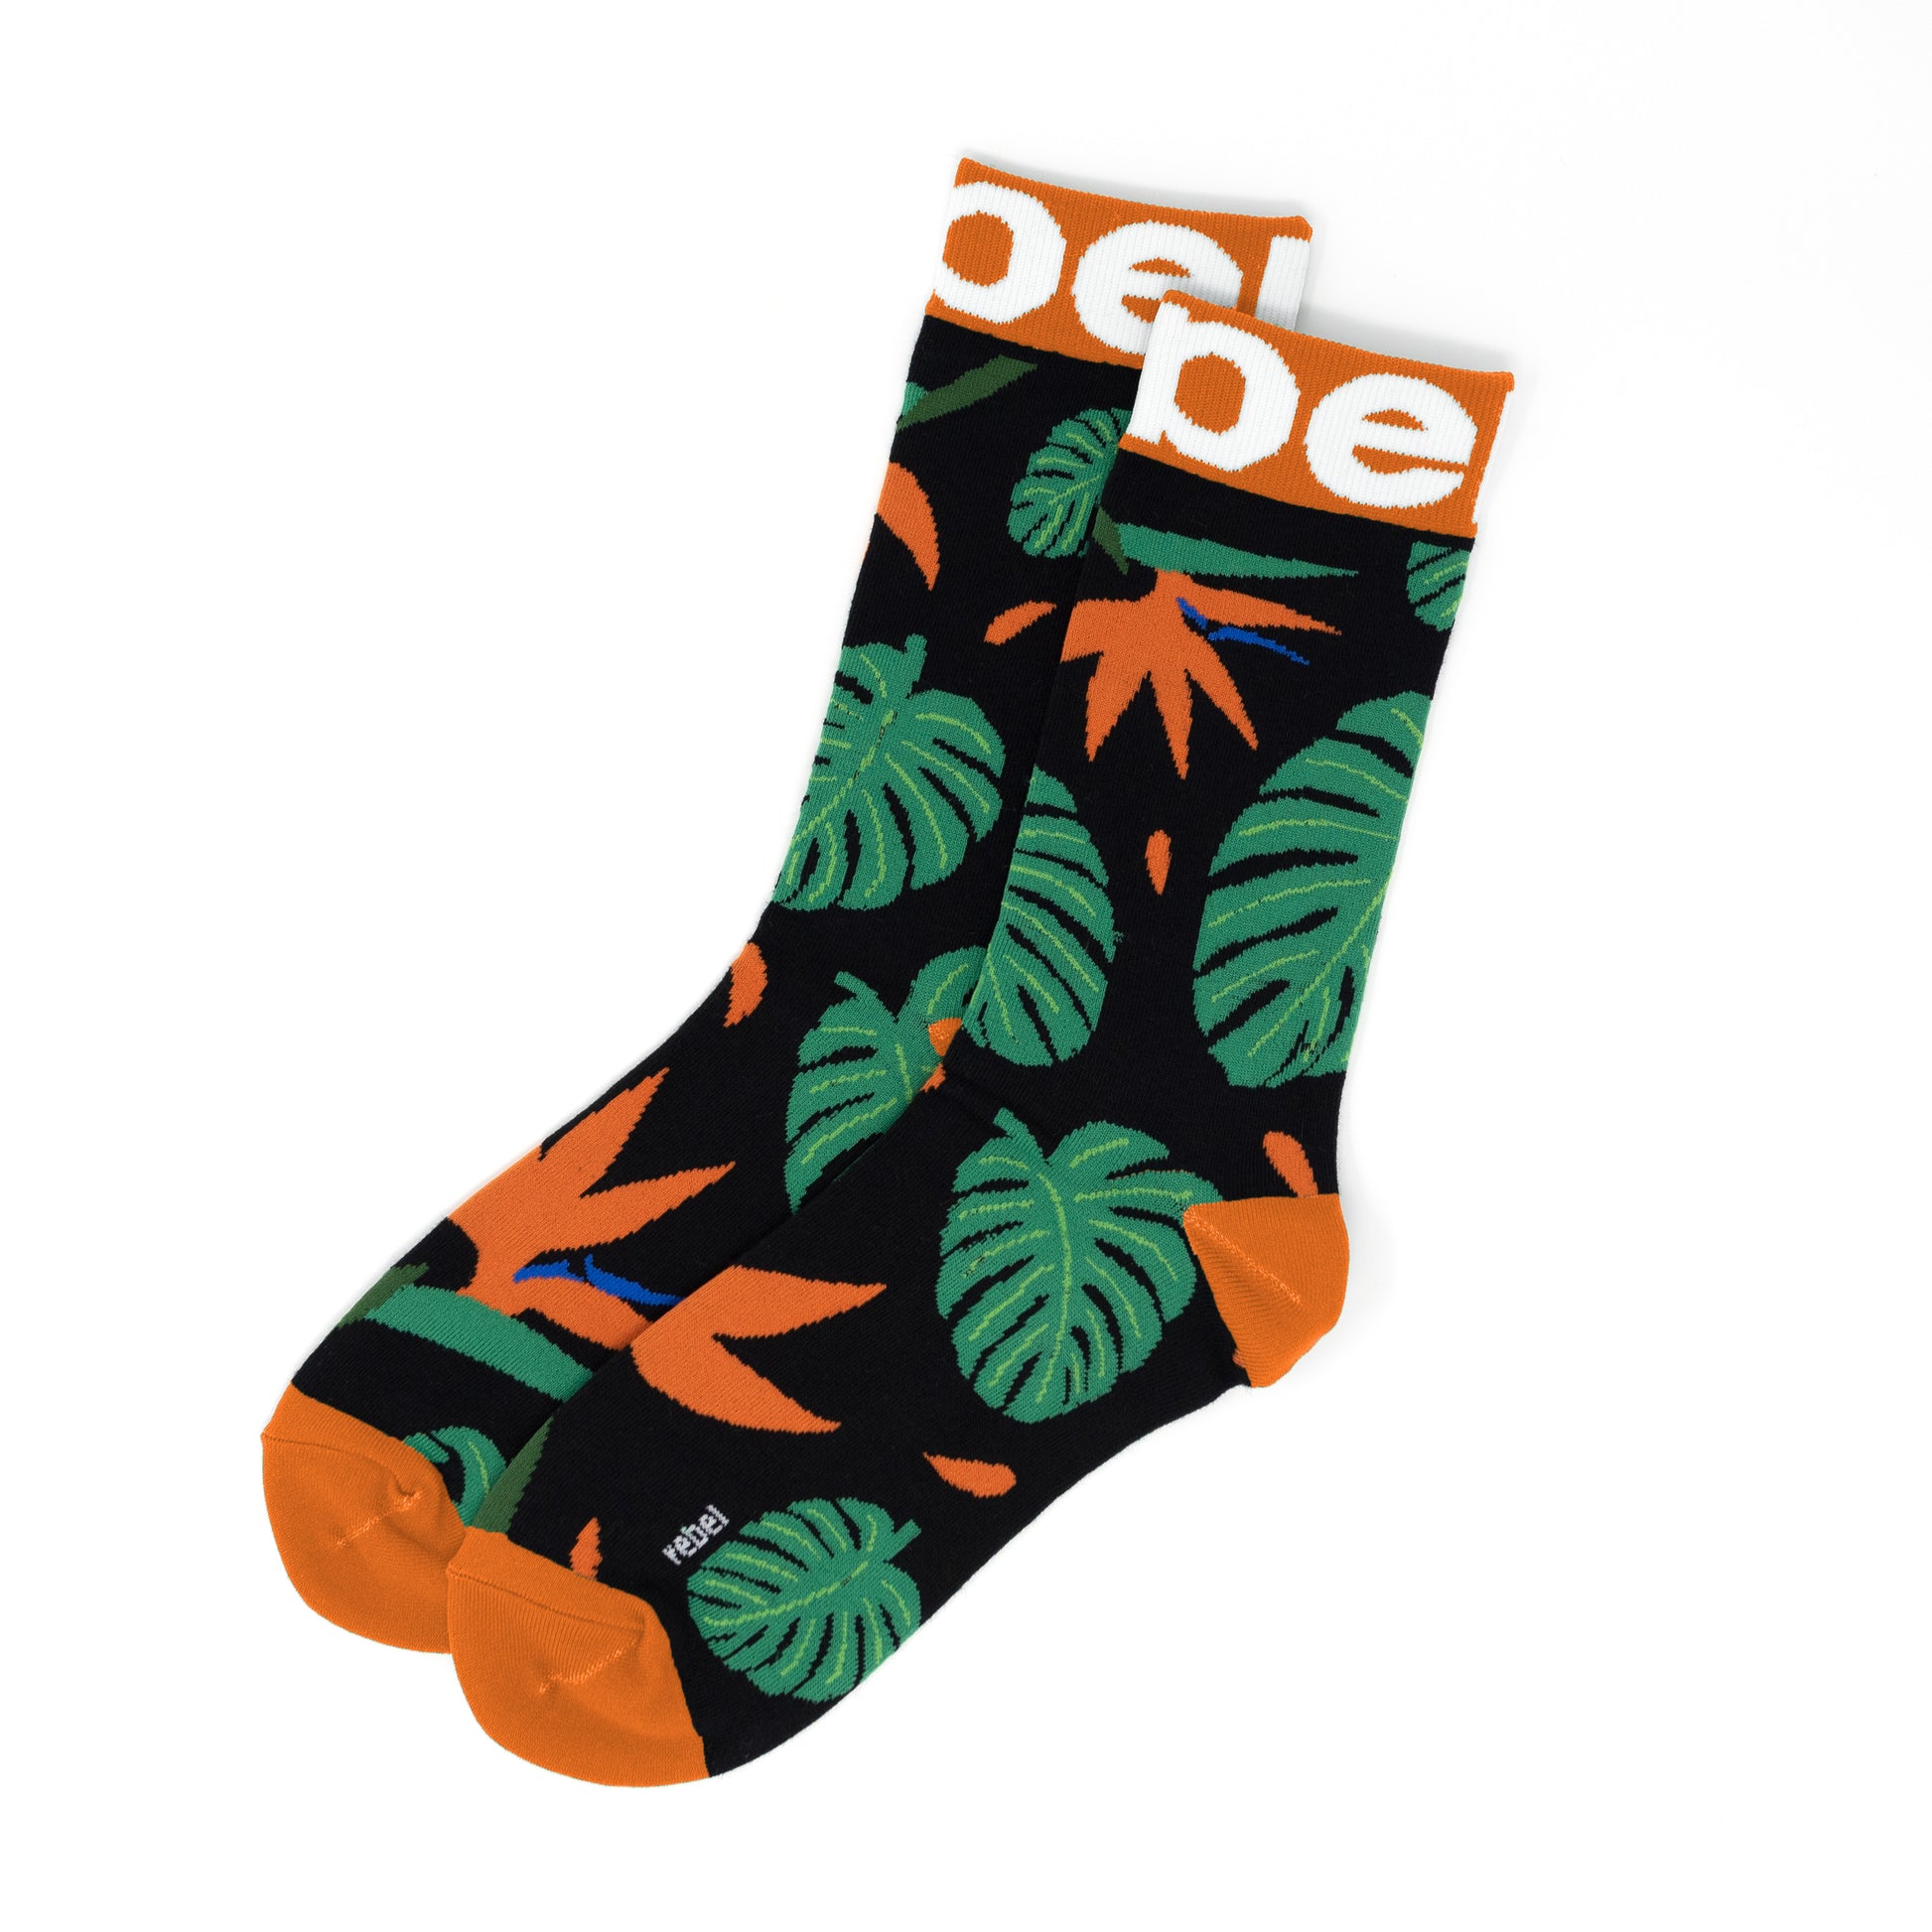 Our Bird of Paradise Flower Socks are perfect for anyone who loves bold and stylish socks.